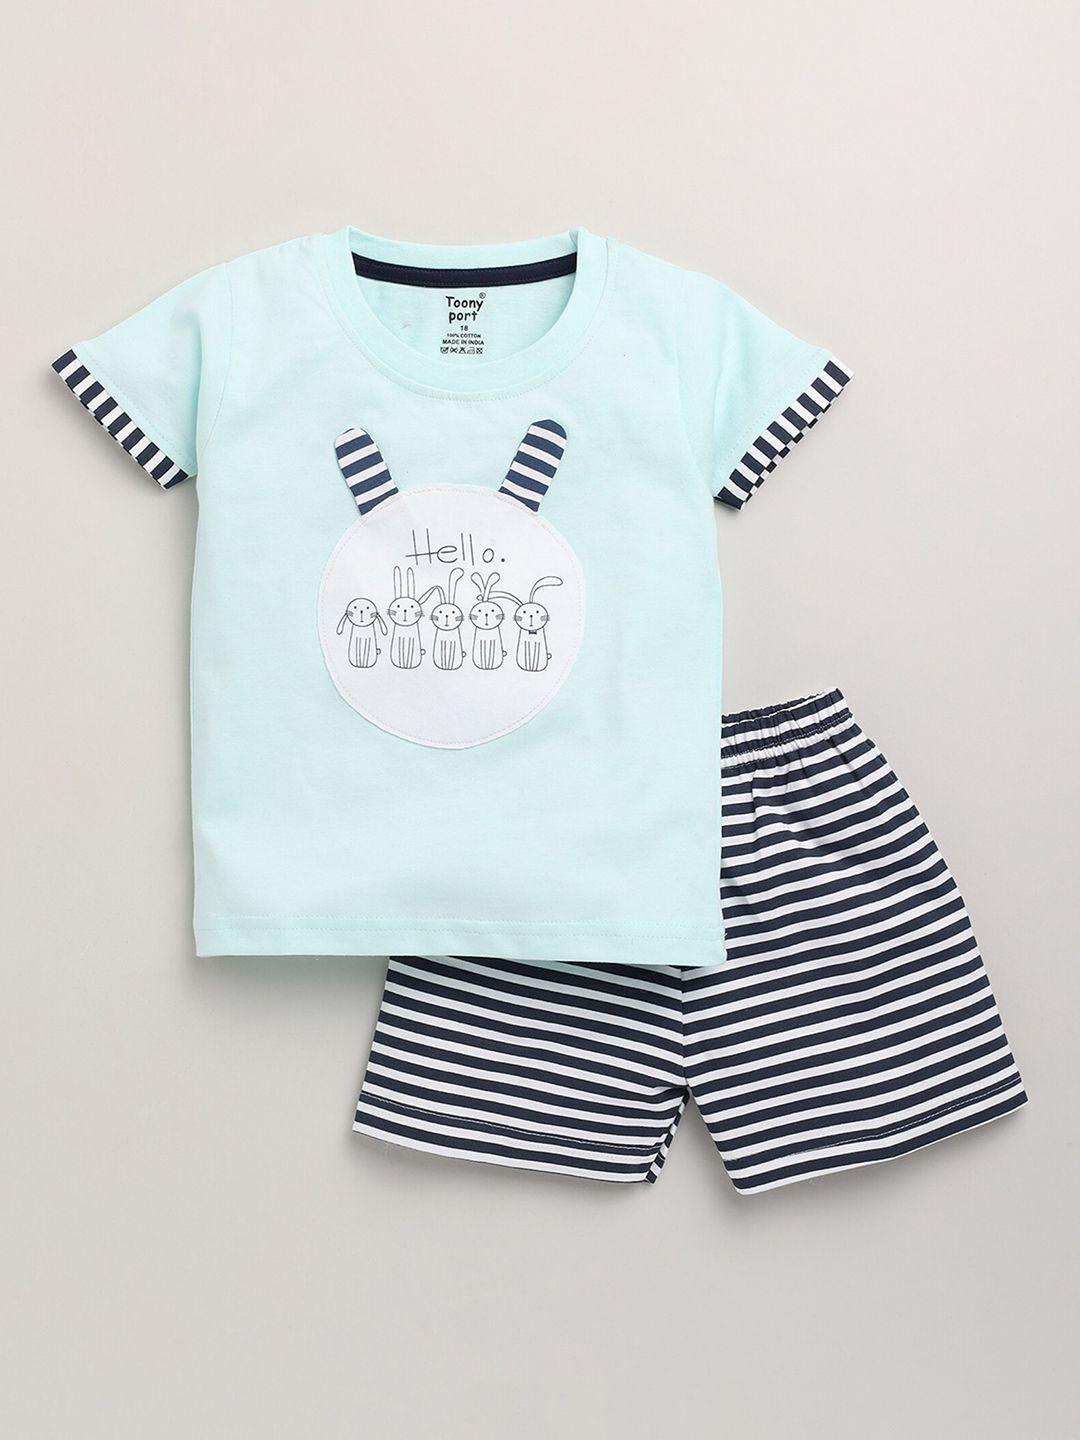 toonyport-kids-turquoise-blue-&-white-printed-pure-cotton-t-shirt-with-shorts